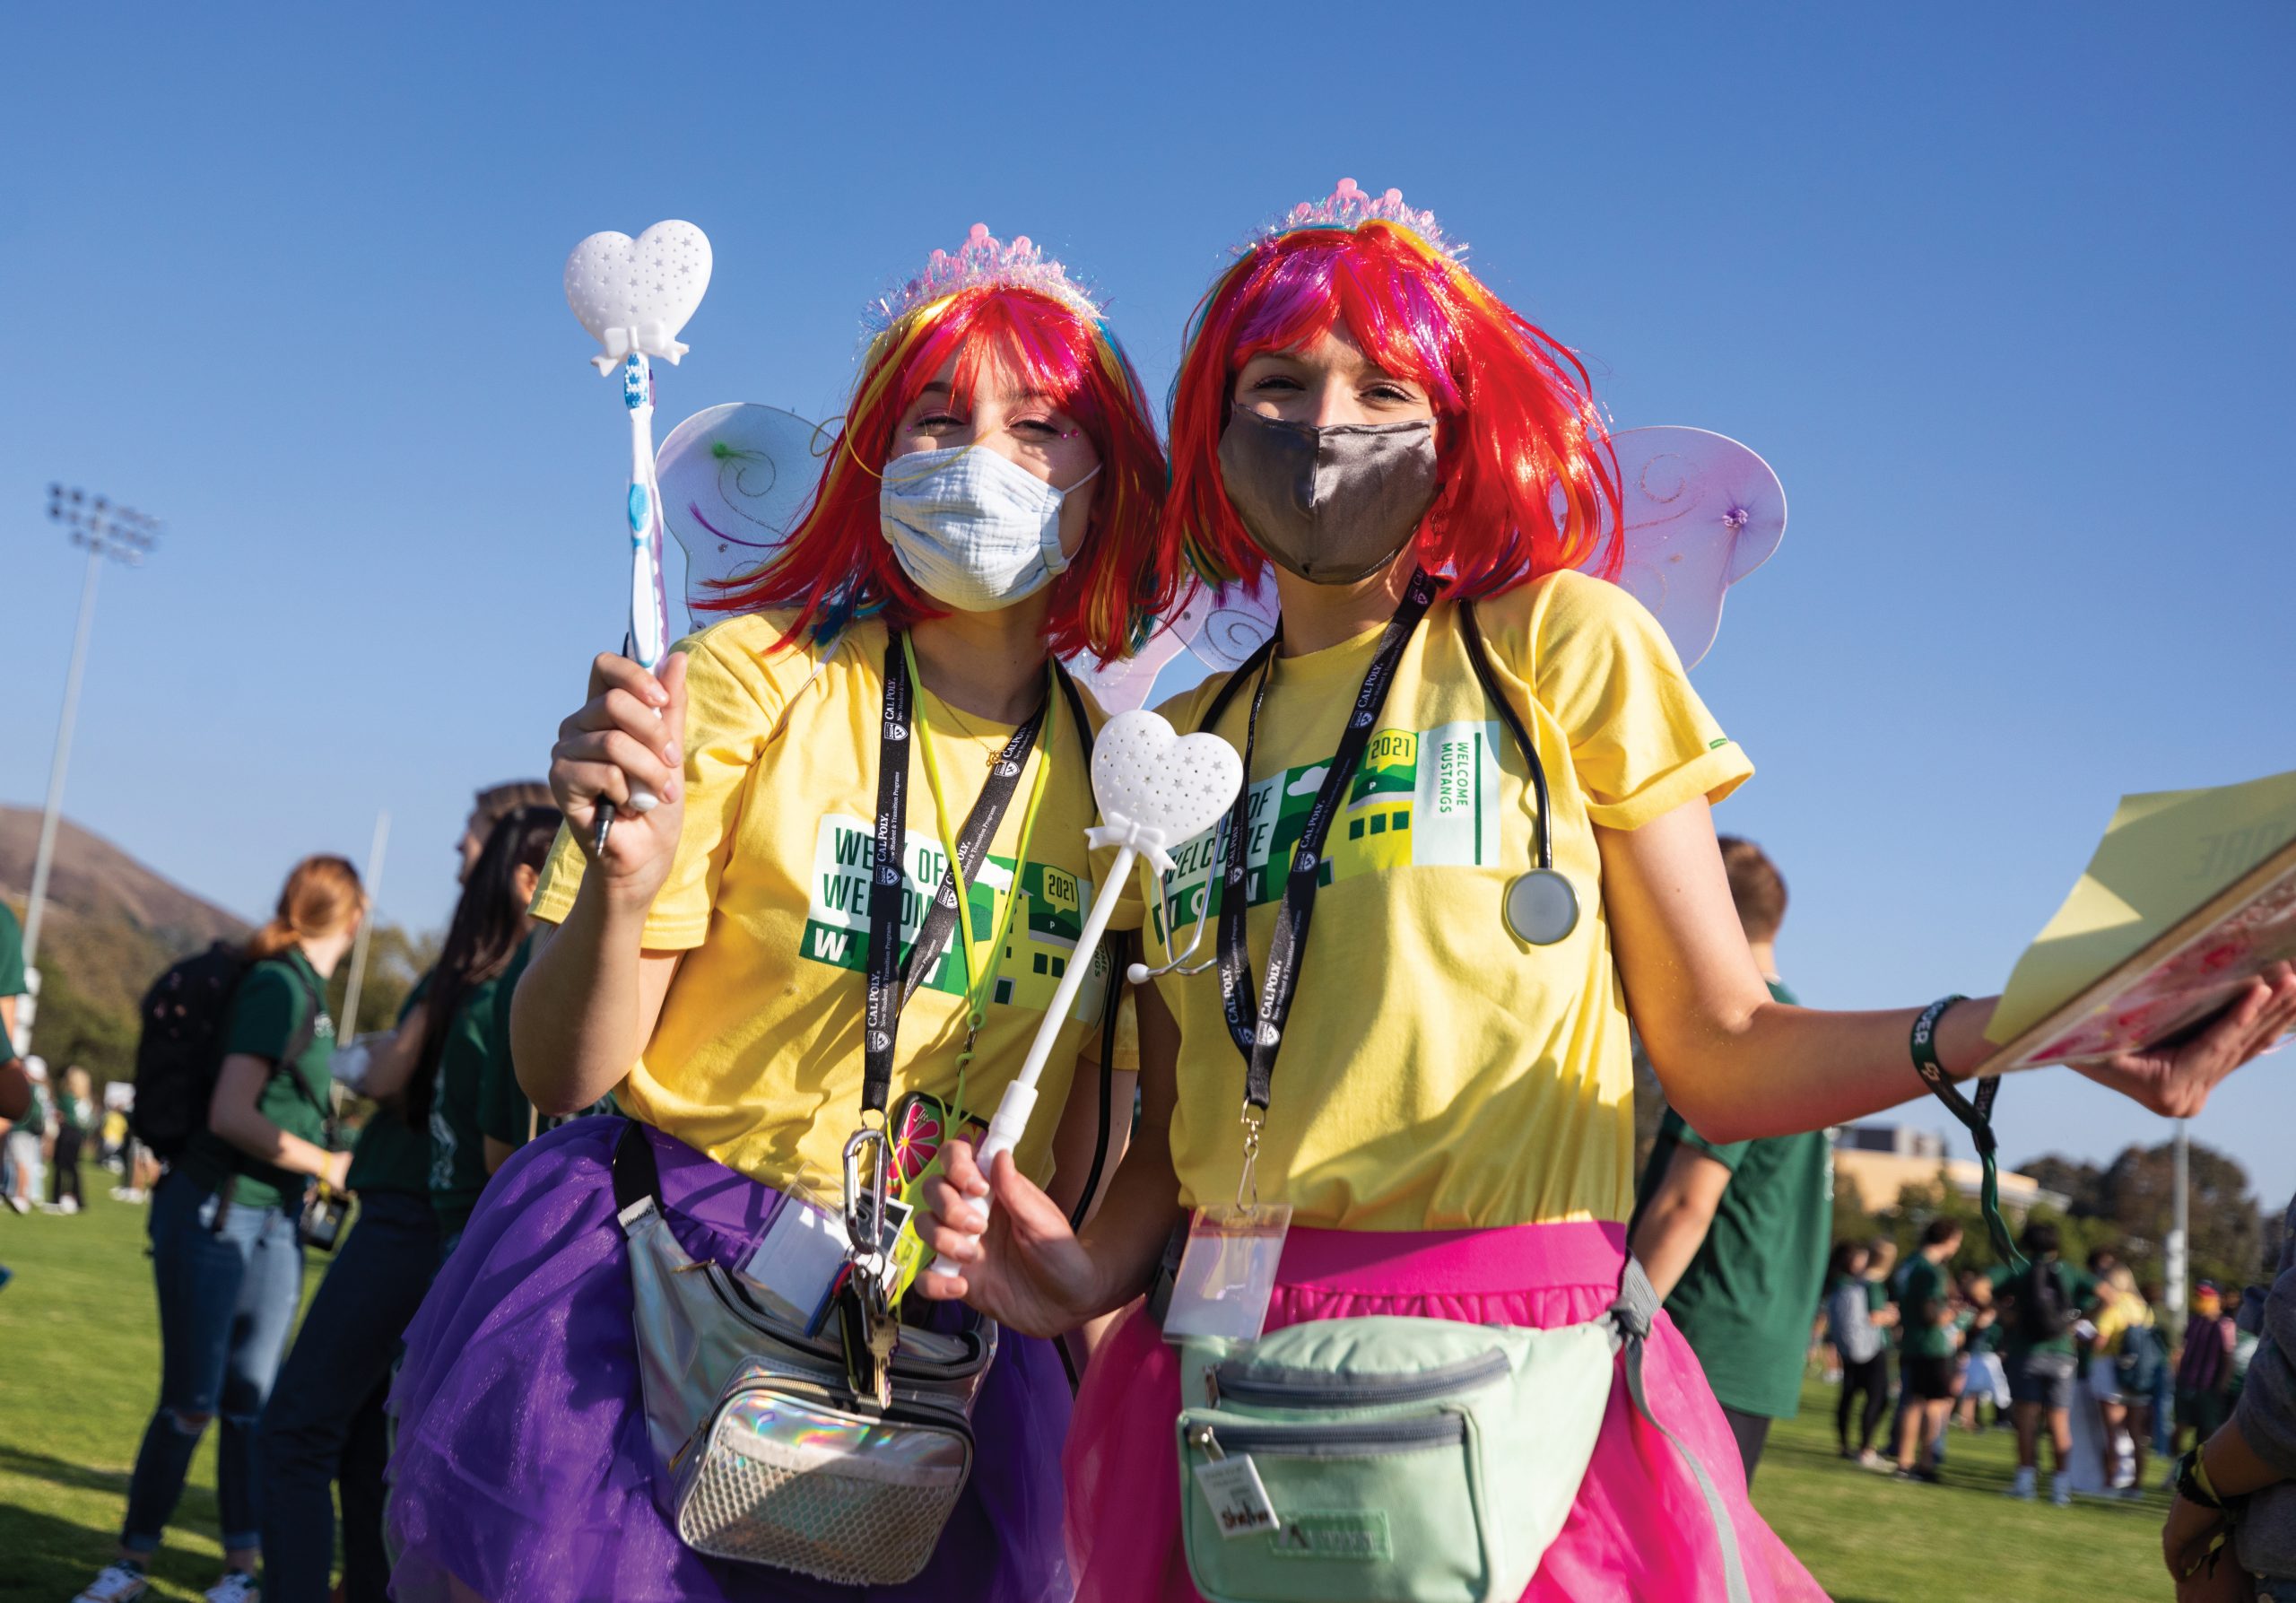 On a green field, two young women pose for a photo wearing yellow WOW leader t-shirts, bright tutus, red wigs, fairy wings and face masks.